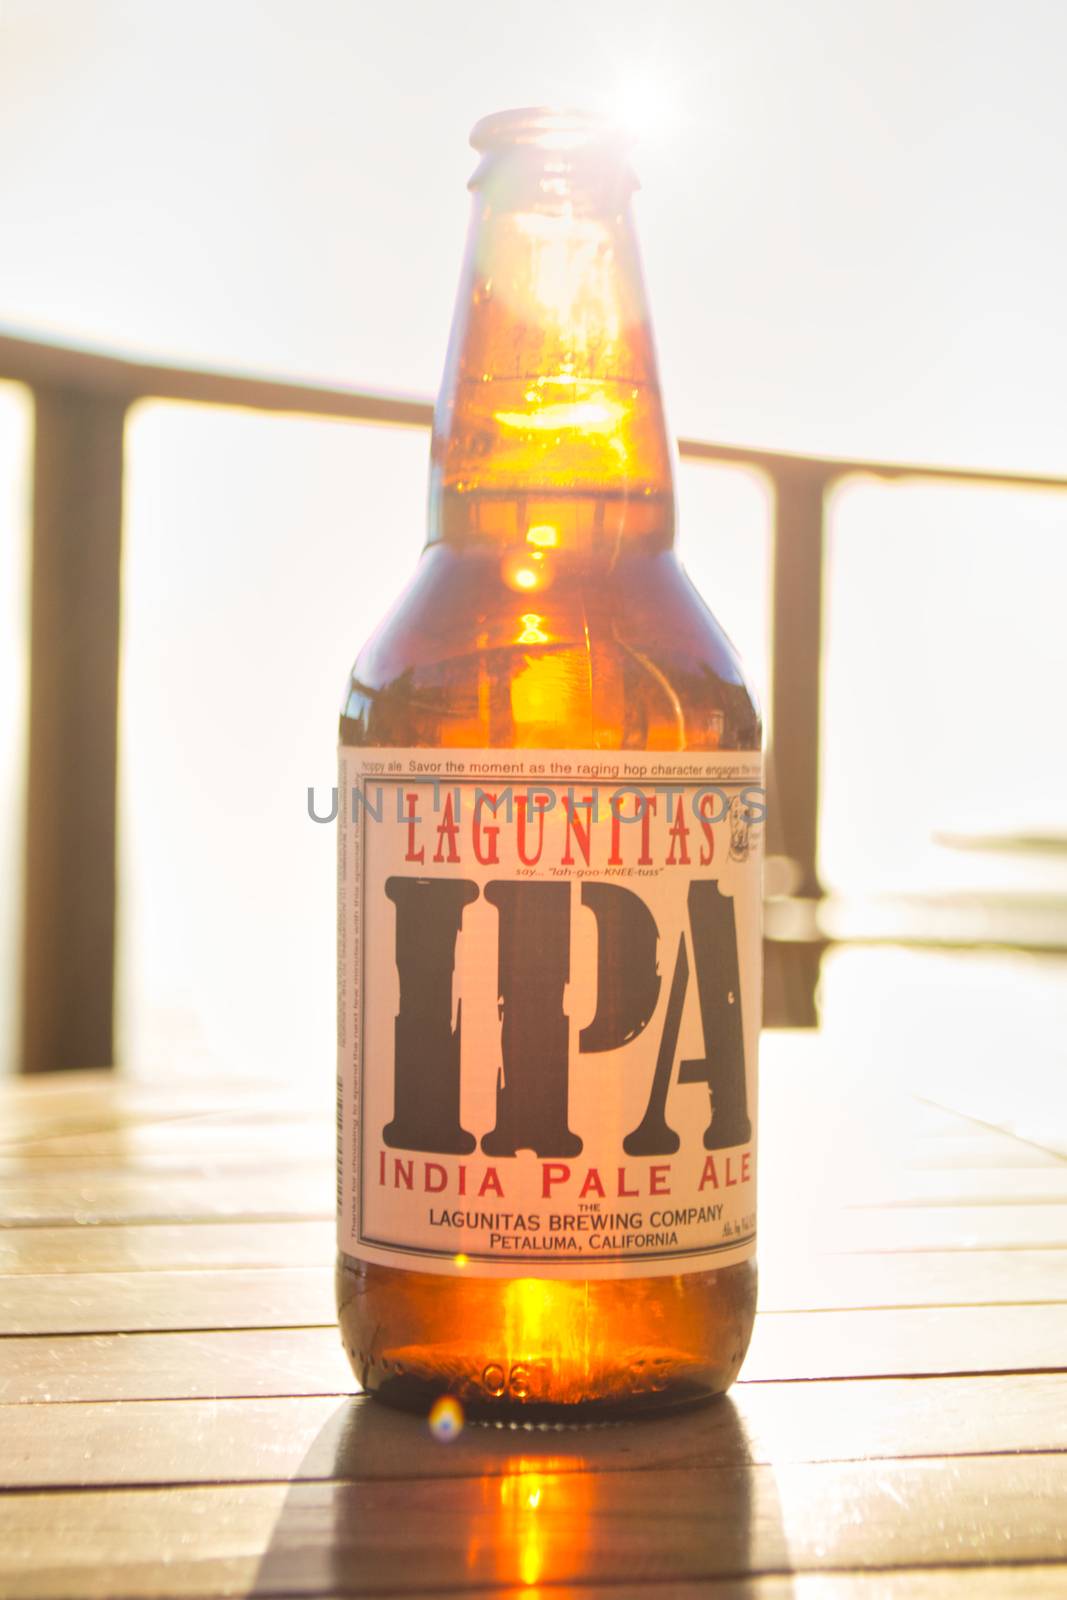 Big Sur, United States, November 2013: Illustrative Editorial: Lagunitas IPA India Pale Ale beer bottle against strong sunlight. Wooden table.